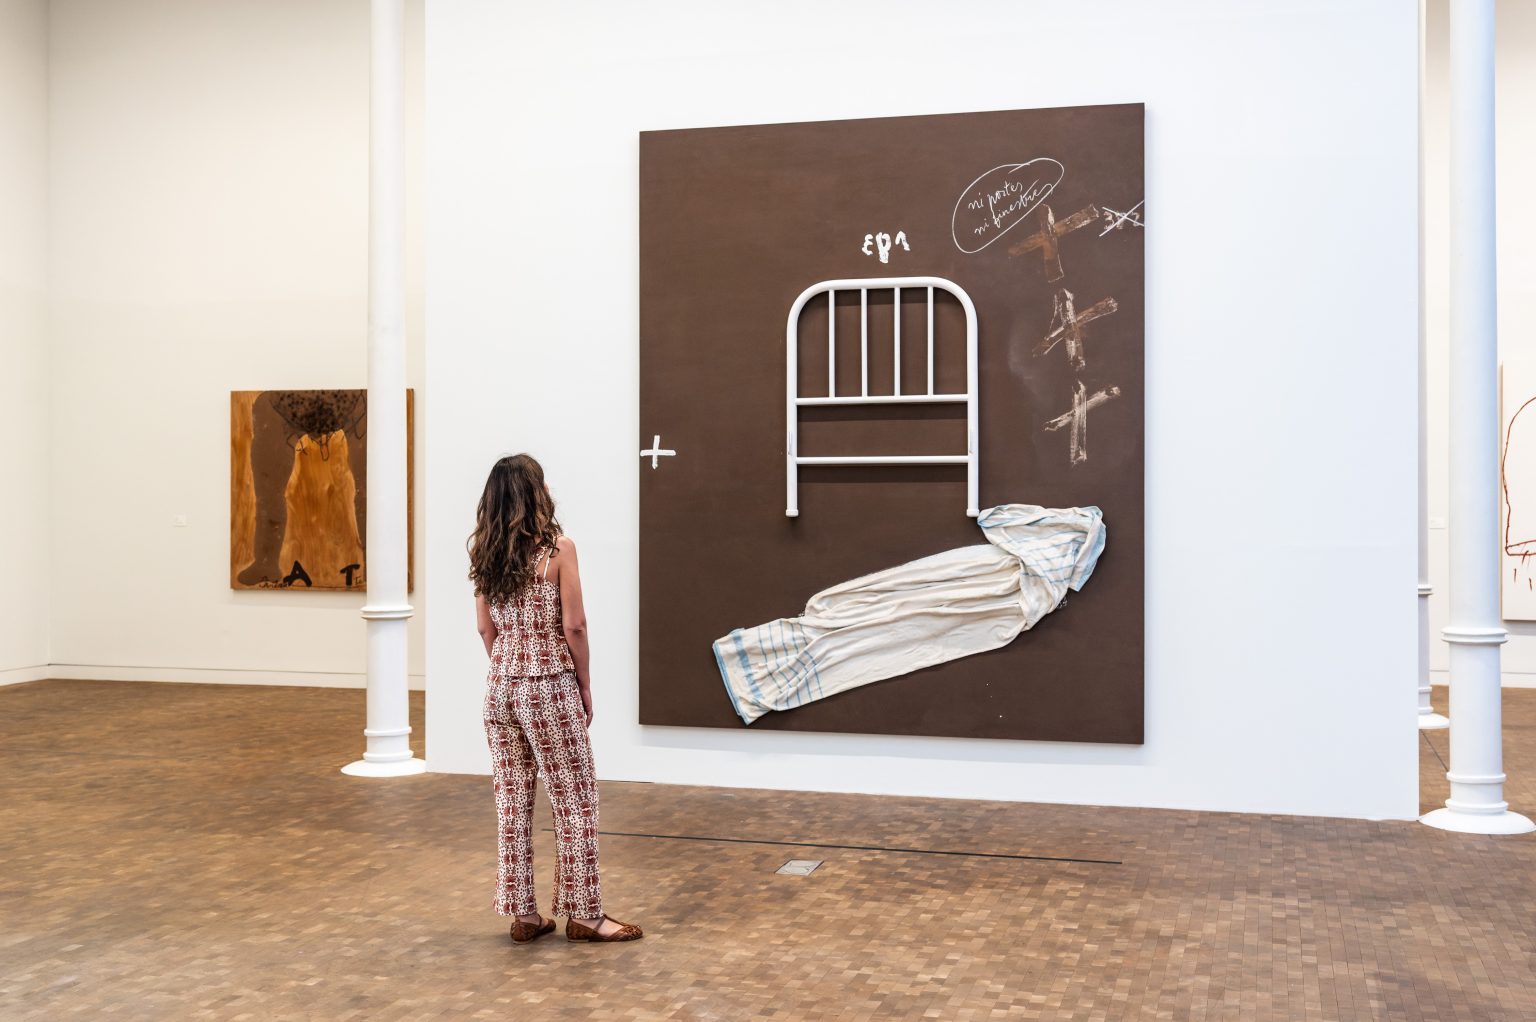 'Antoni Tàpies. The practice of art' at the Tàpies Museum in Barcelona